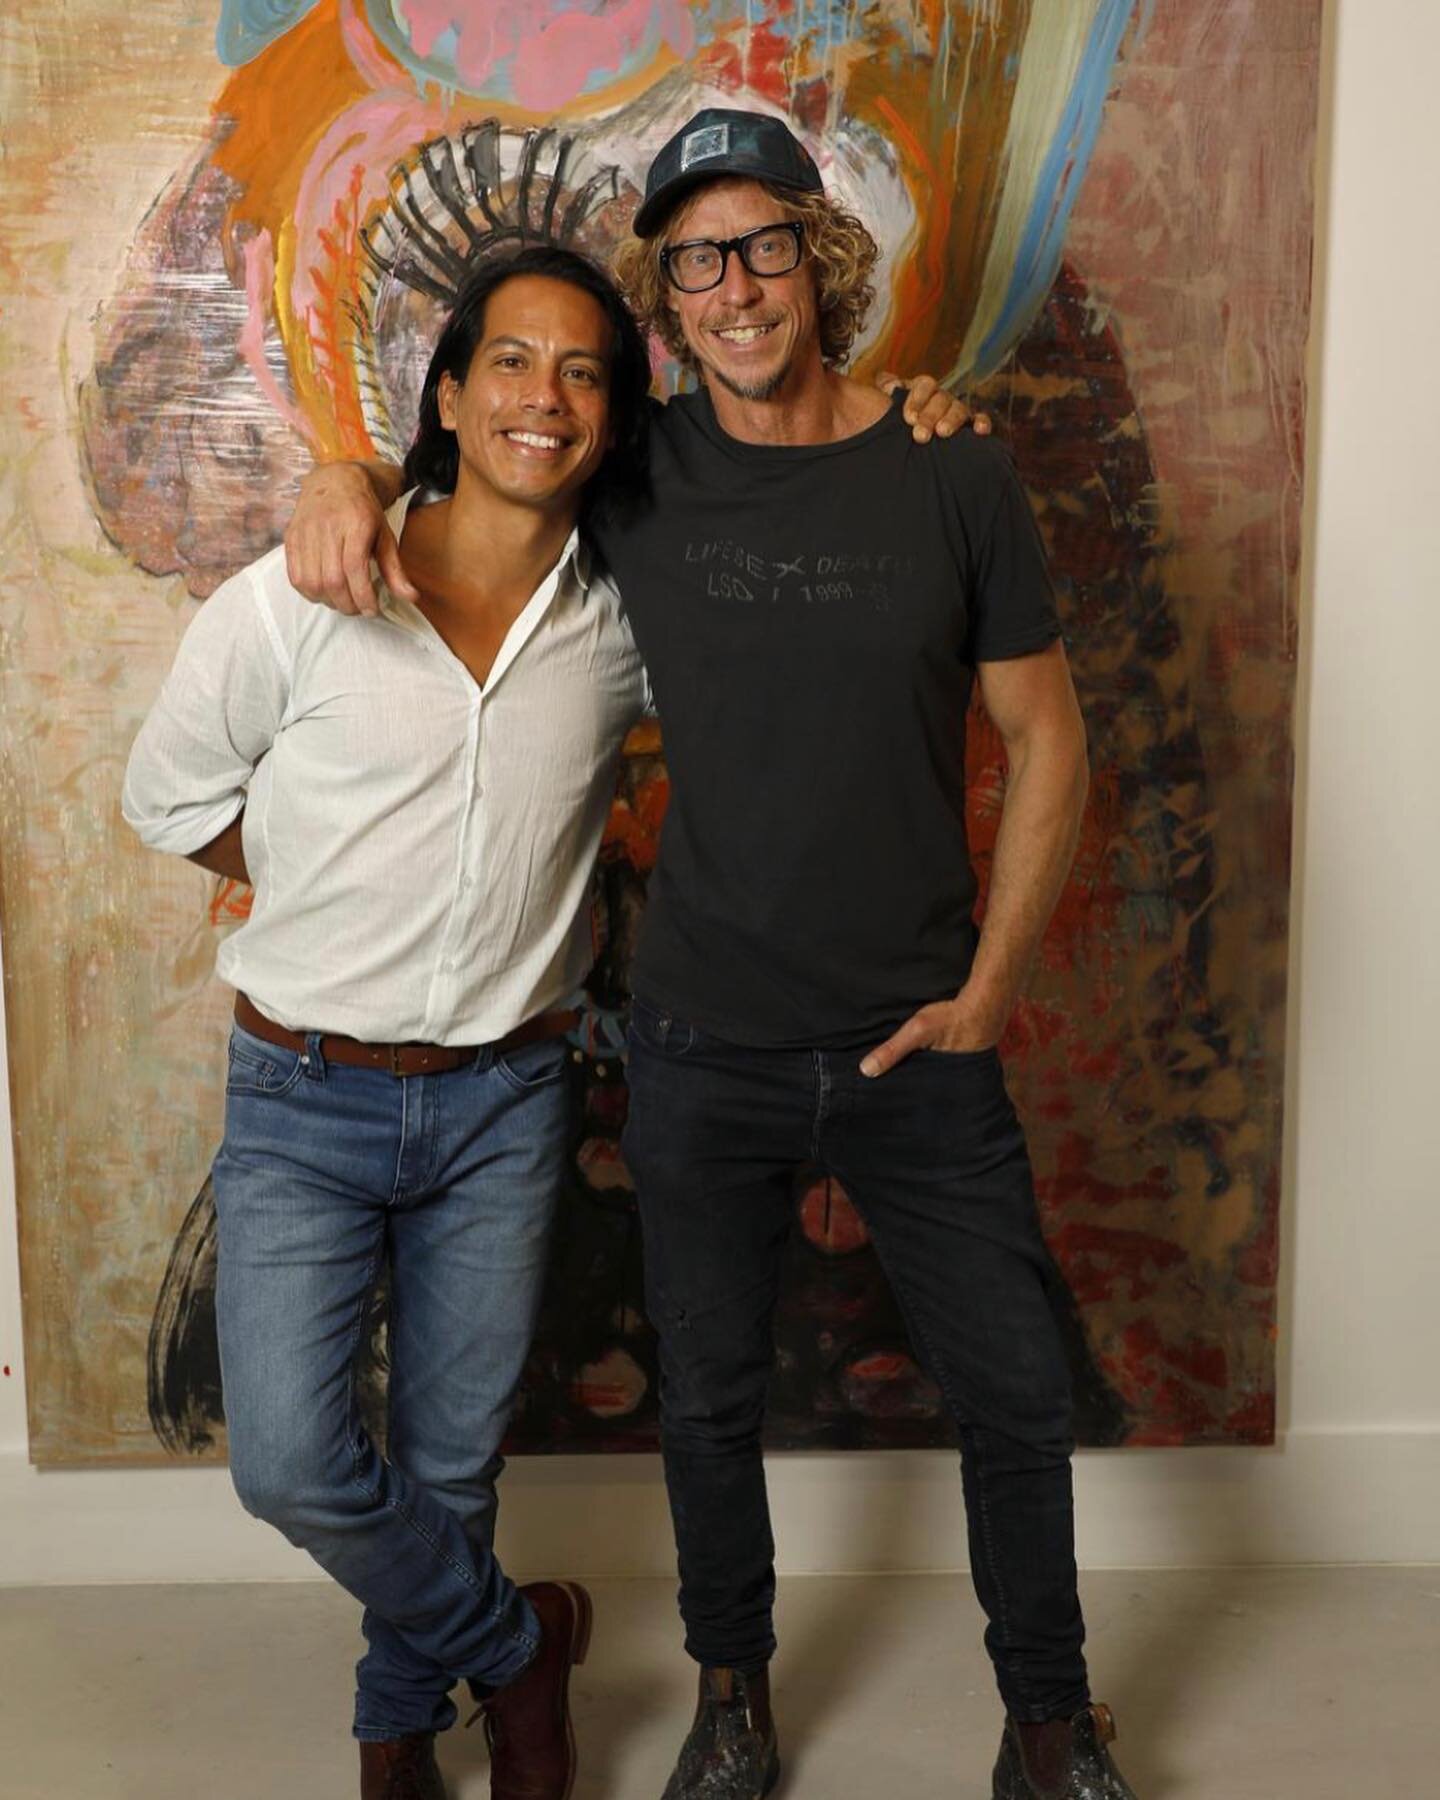 The story of the beautiful Craig Ruddy and robertoperu captured on celluloid. Love it. Seek it out. &lsquo;A Portrait of Love&rsquo;⭐️⭐️⭐️⭐️⭐️#artistcraigruddy #craigruddy #robertomezamont ❤️ @sydneymardigras @queerscreen